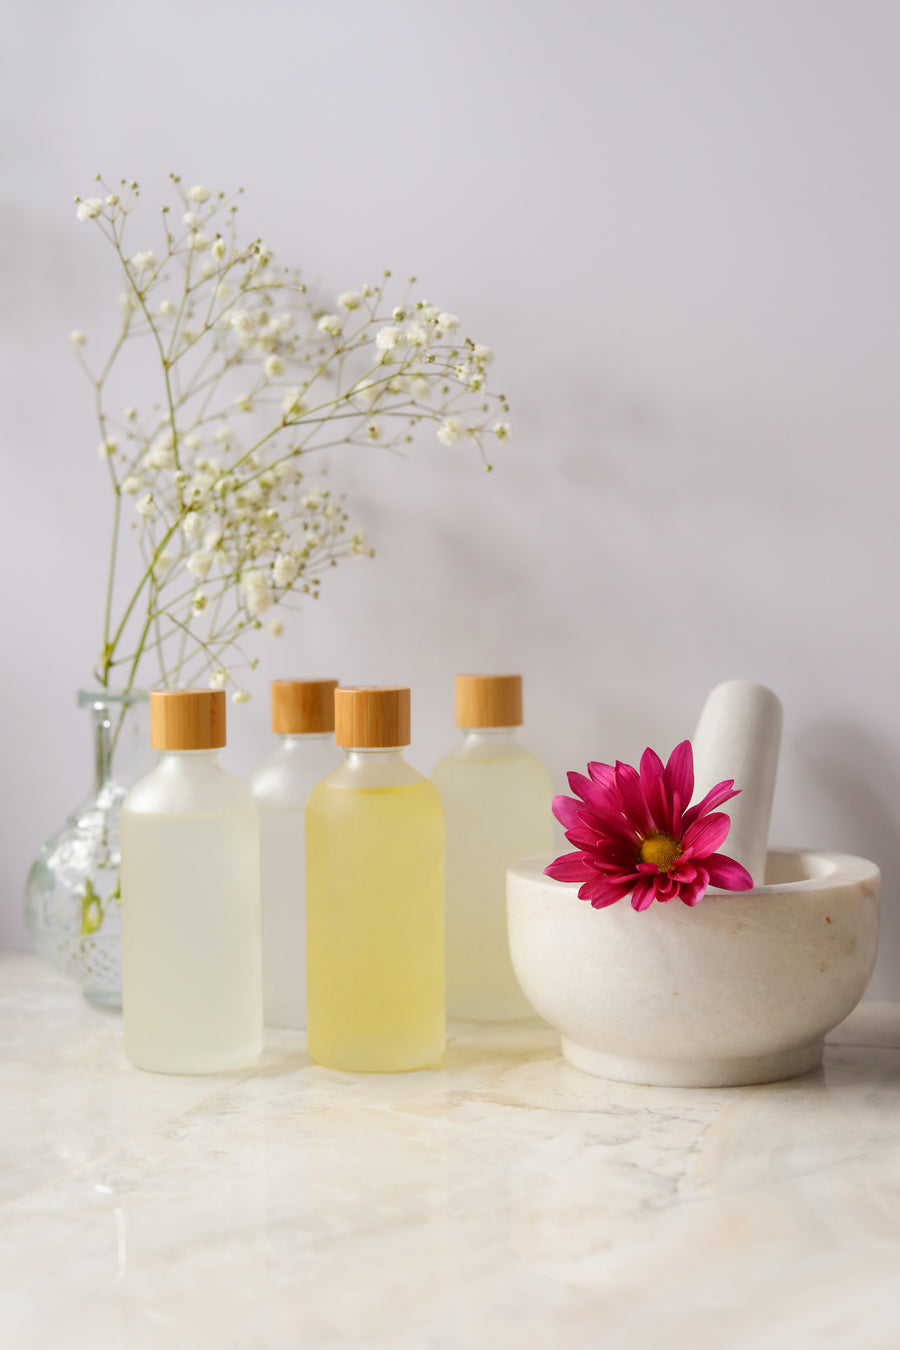 The Aromatherapy of Moods: Scents To Help You Feel Your Best